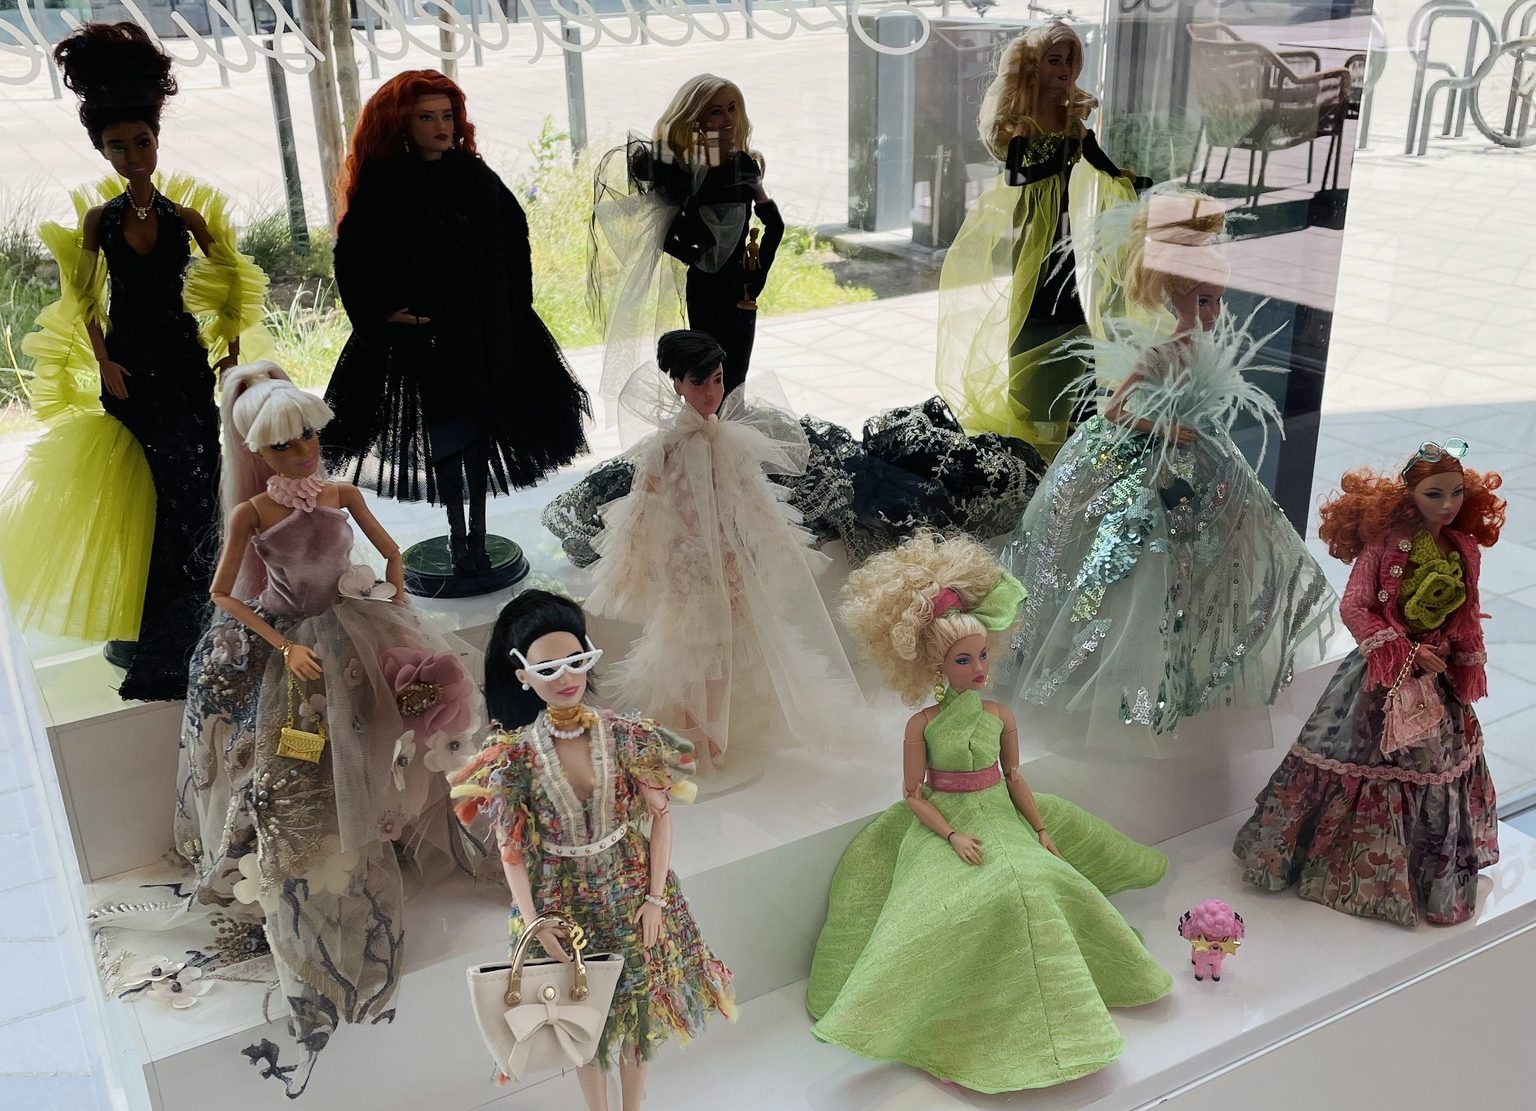 Barbie Dolls Dressed by Hungarian Luxury Brand Exhibited at New Location